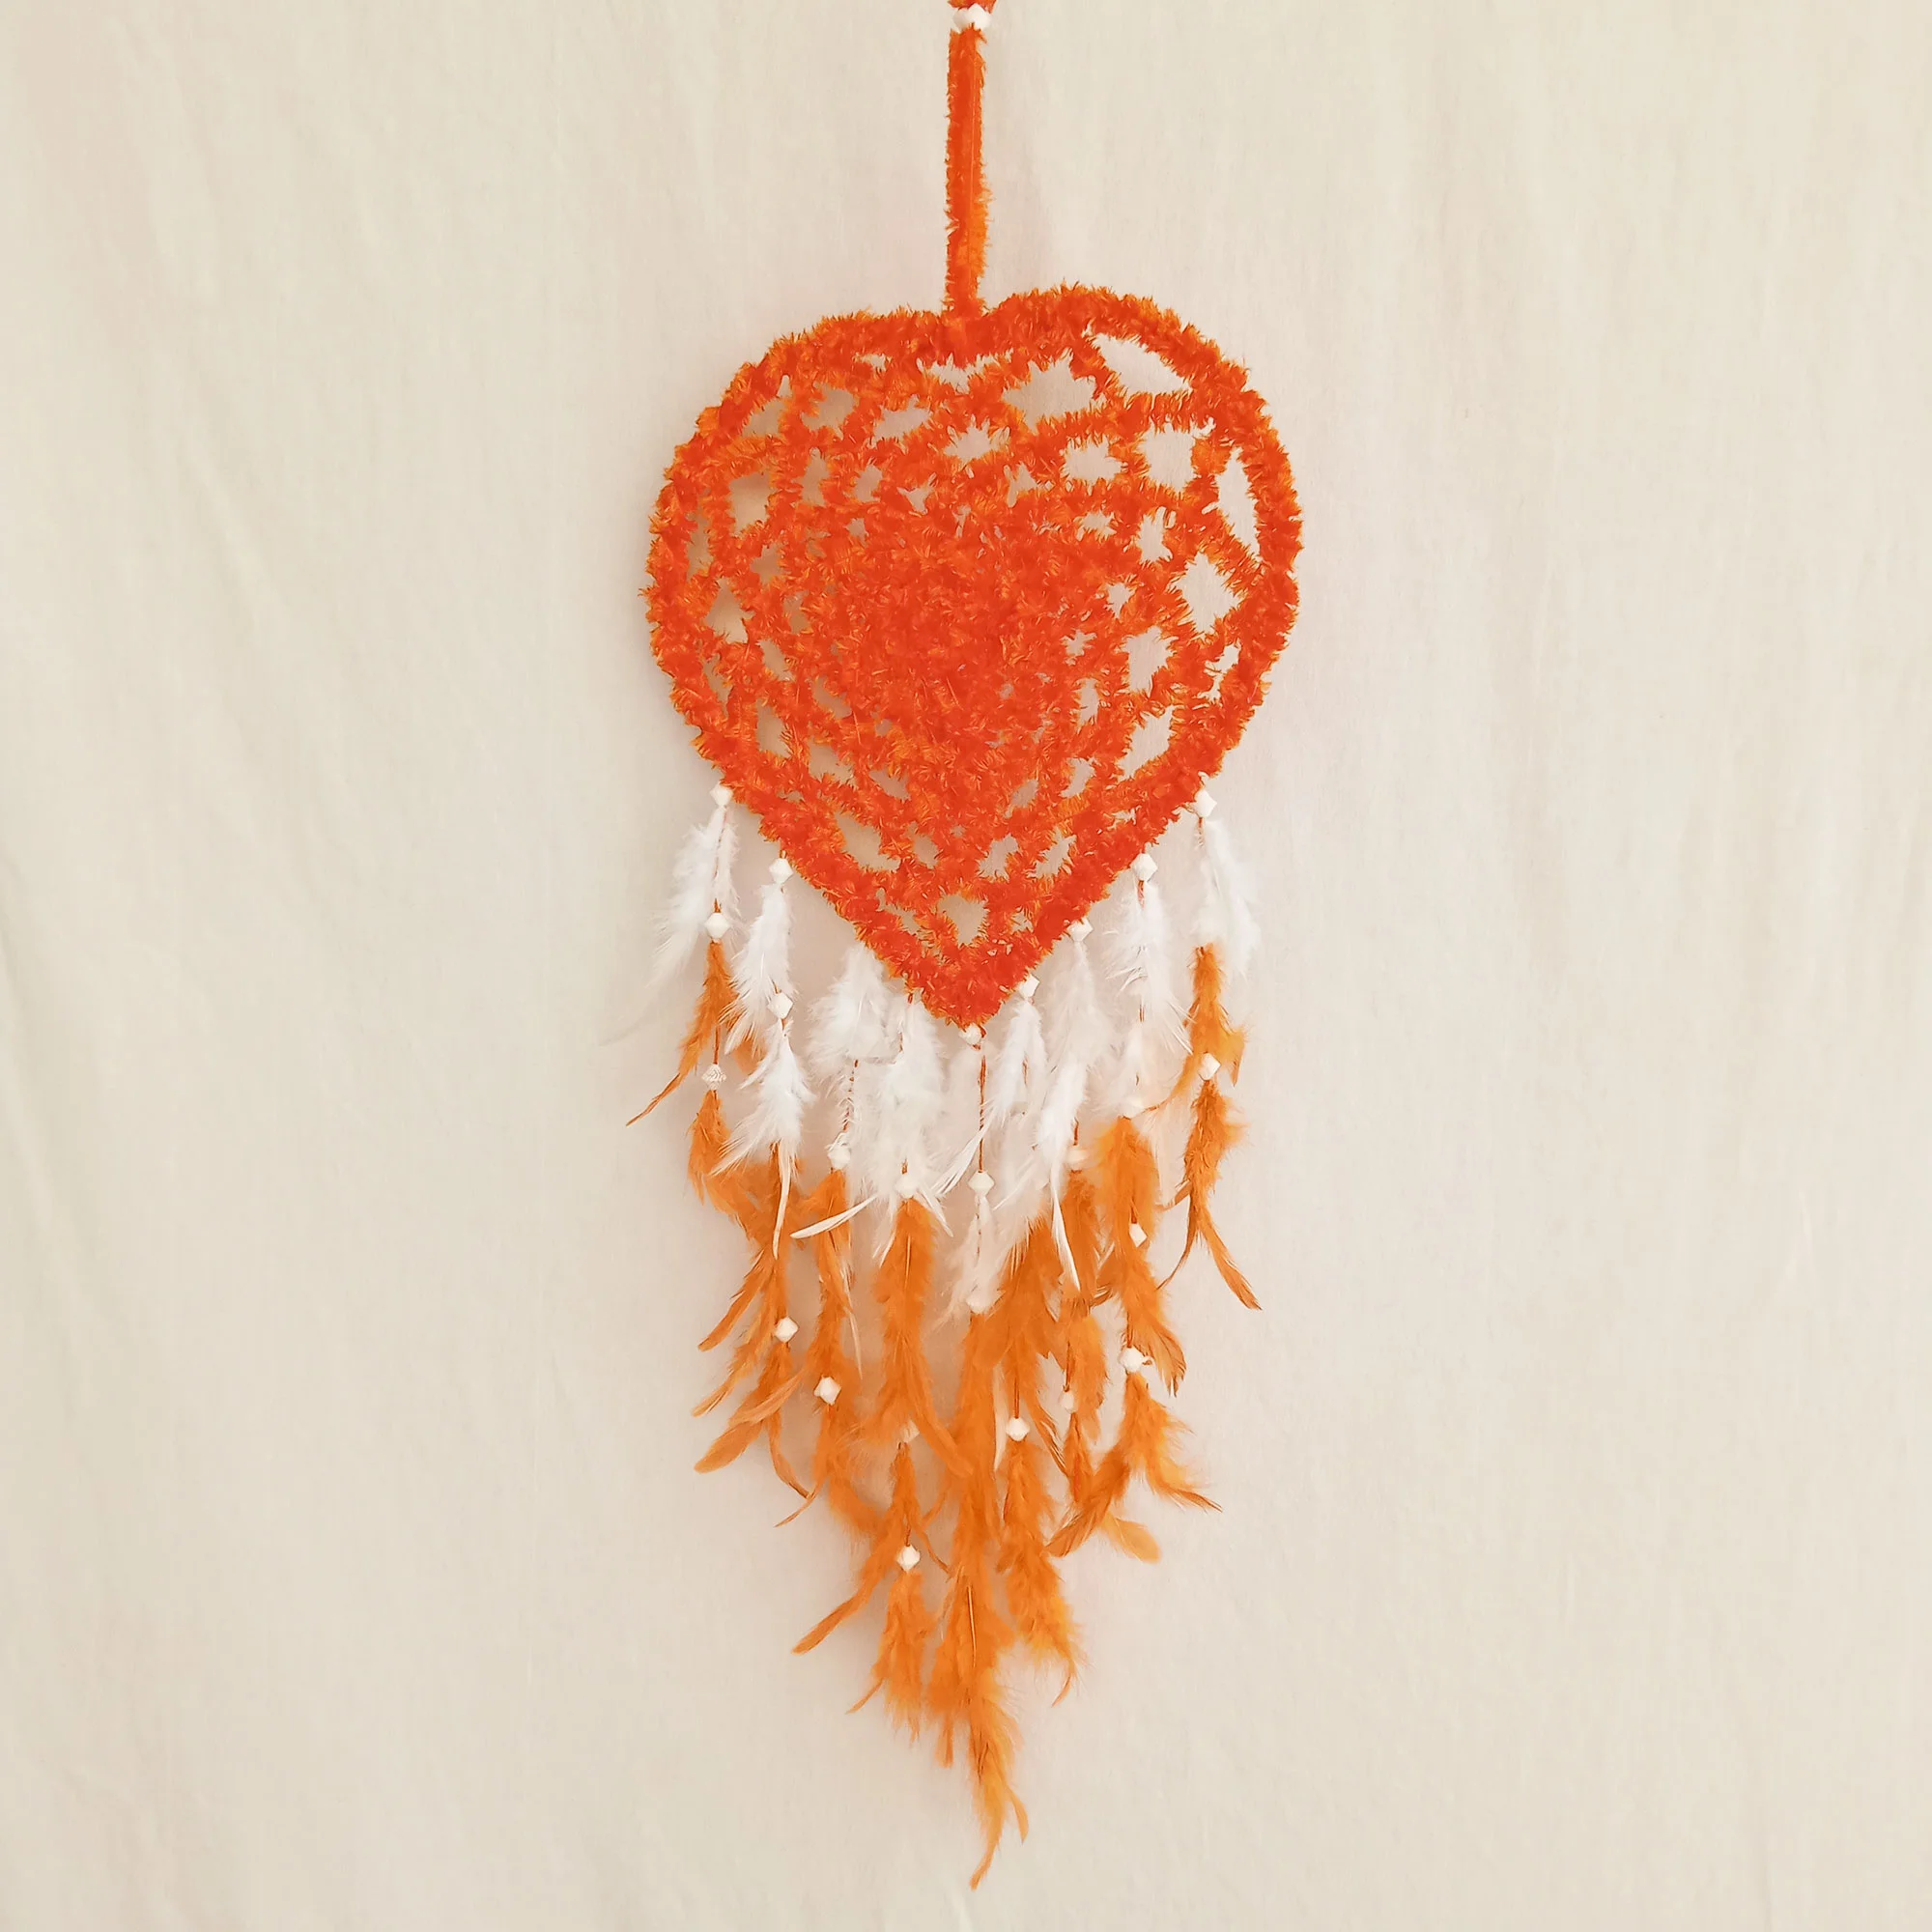 Orange White Dream Catcher For Wall Hangings, Home Décor, Handmade for Bedroom, Balcony Decorative with Feathers